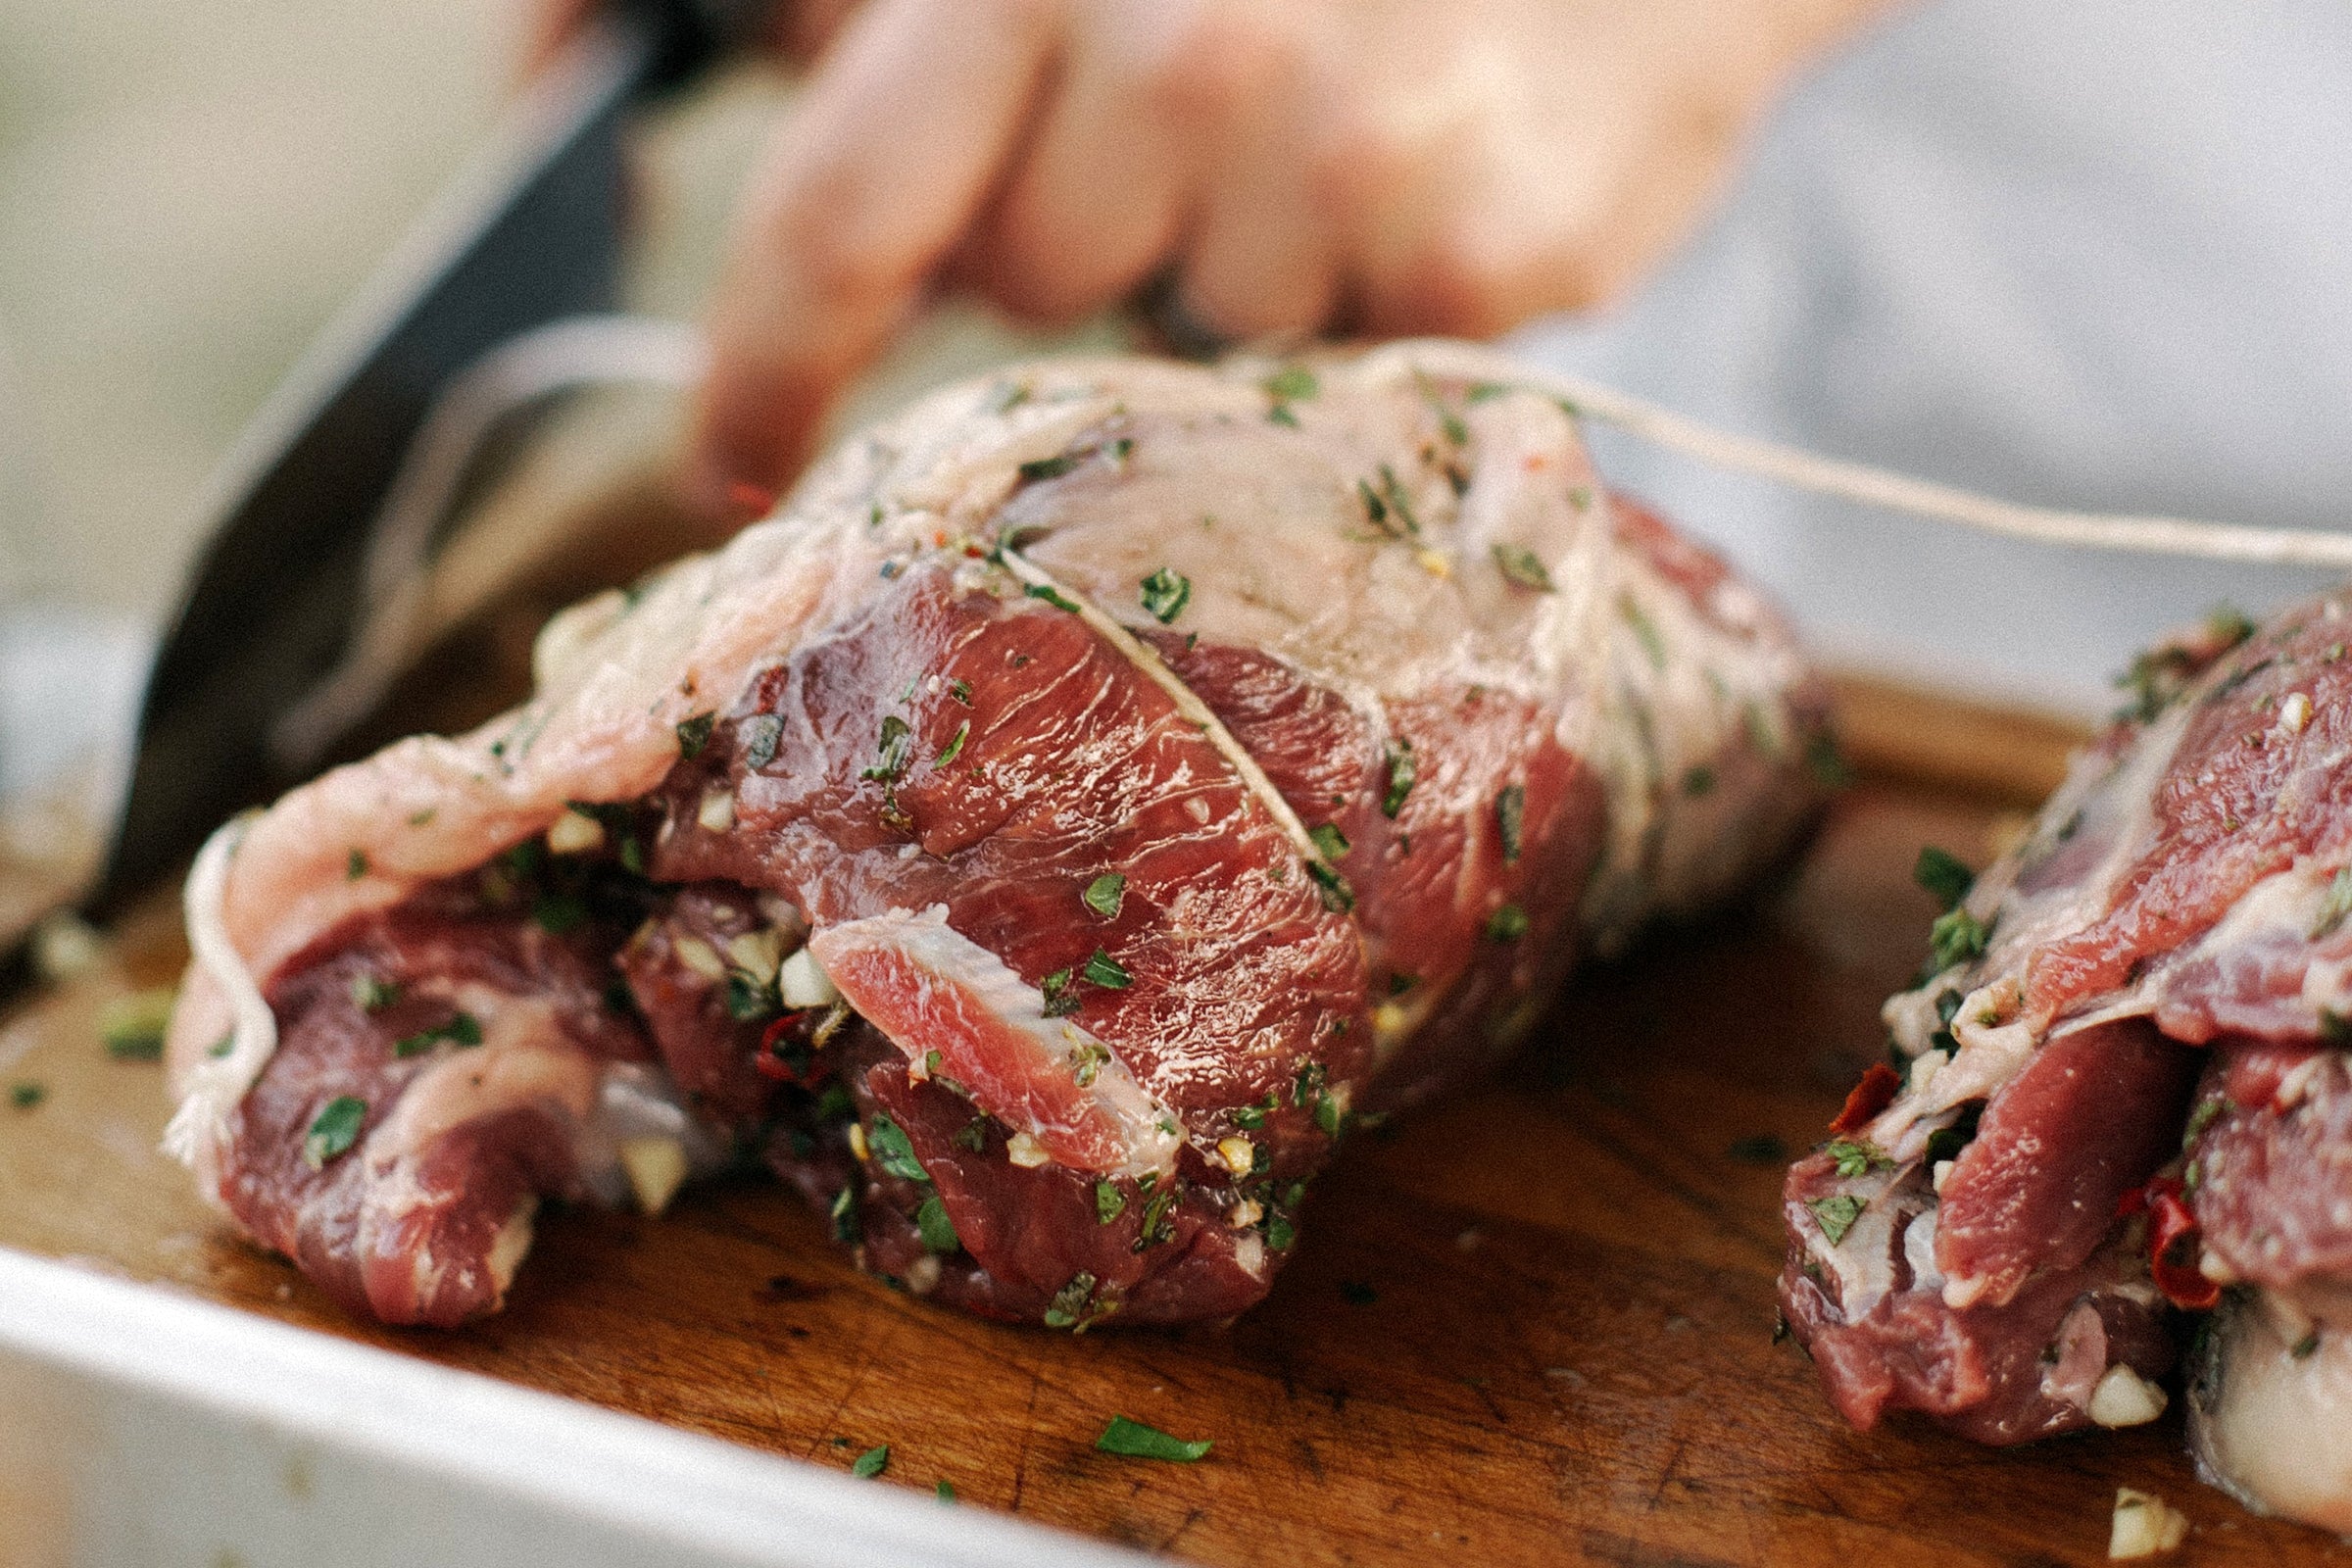 Everything you need to know about marinating meat